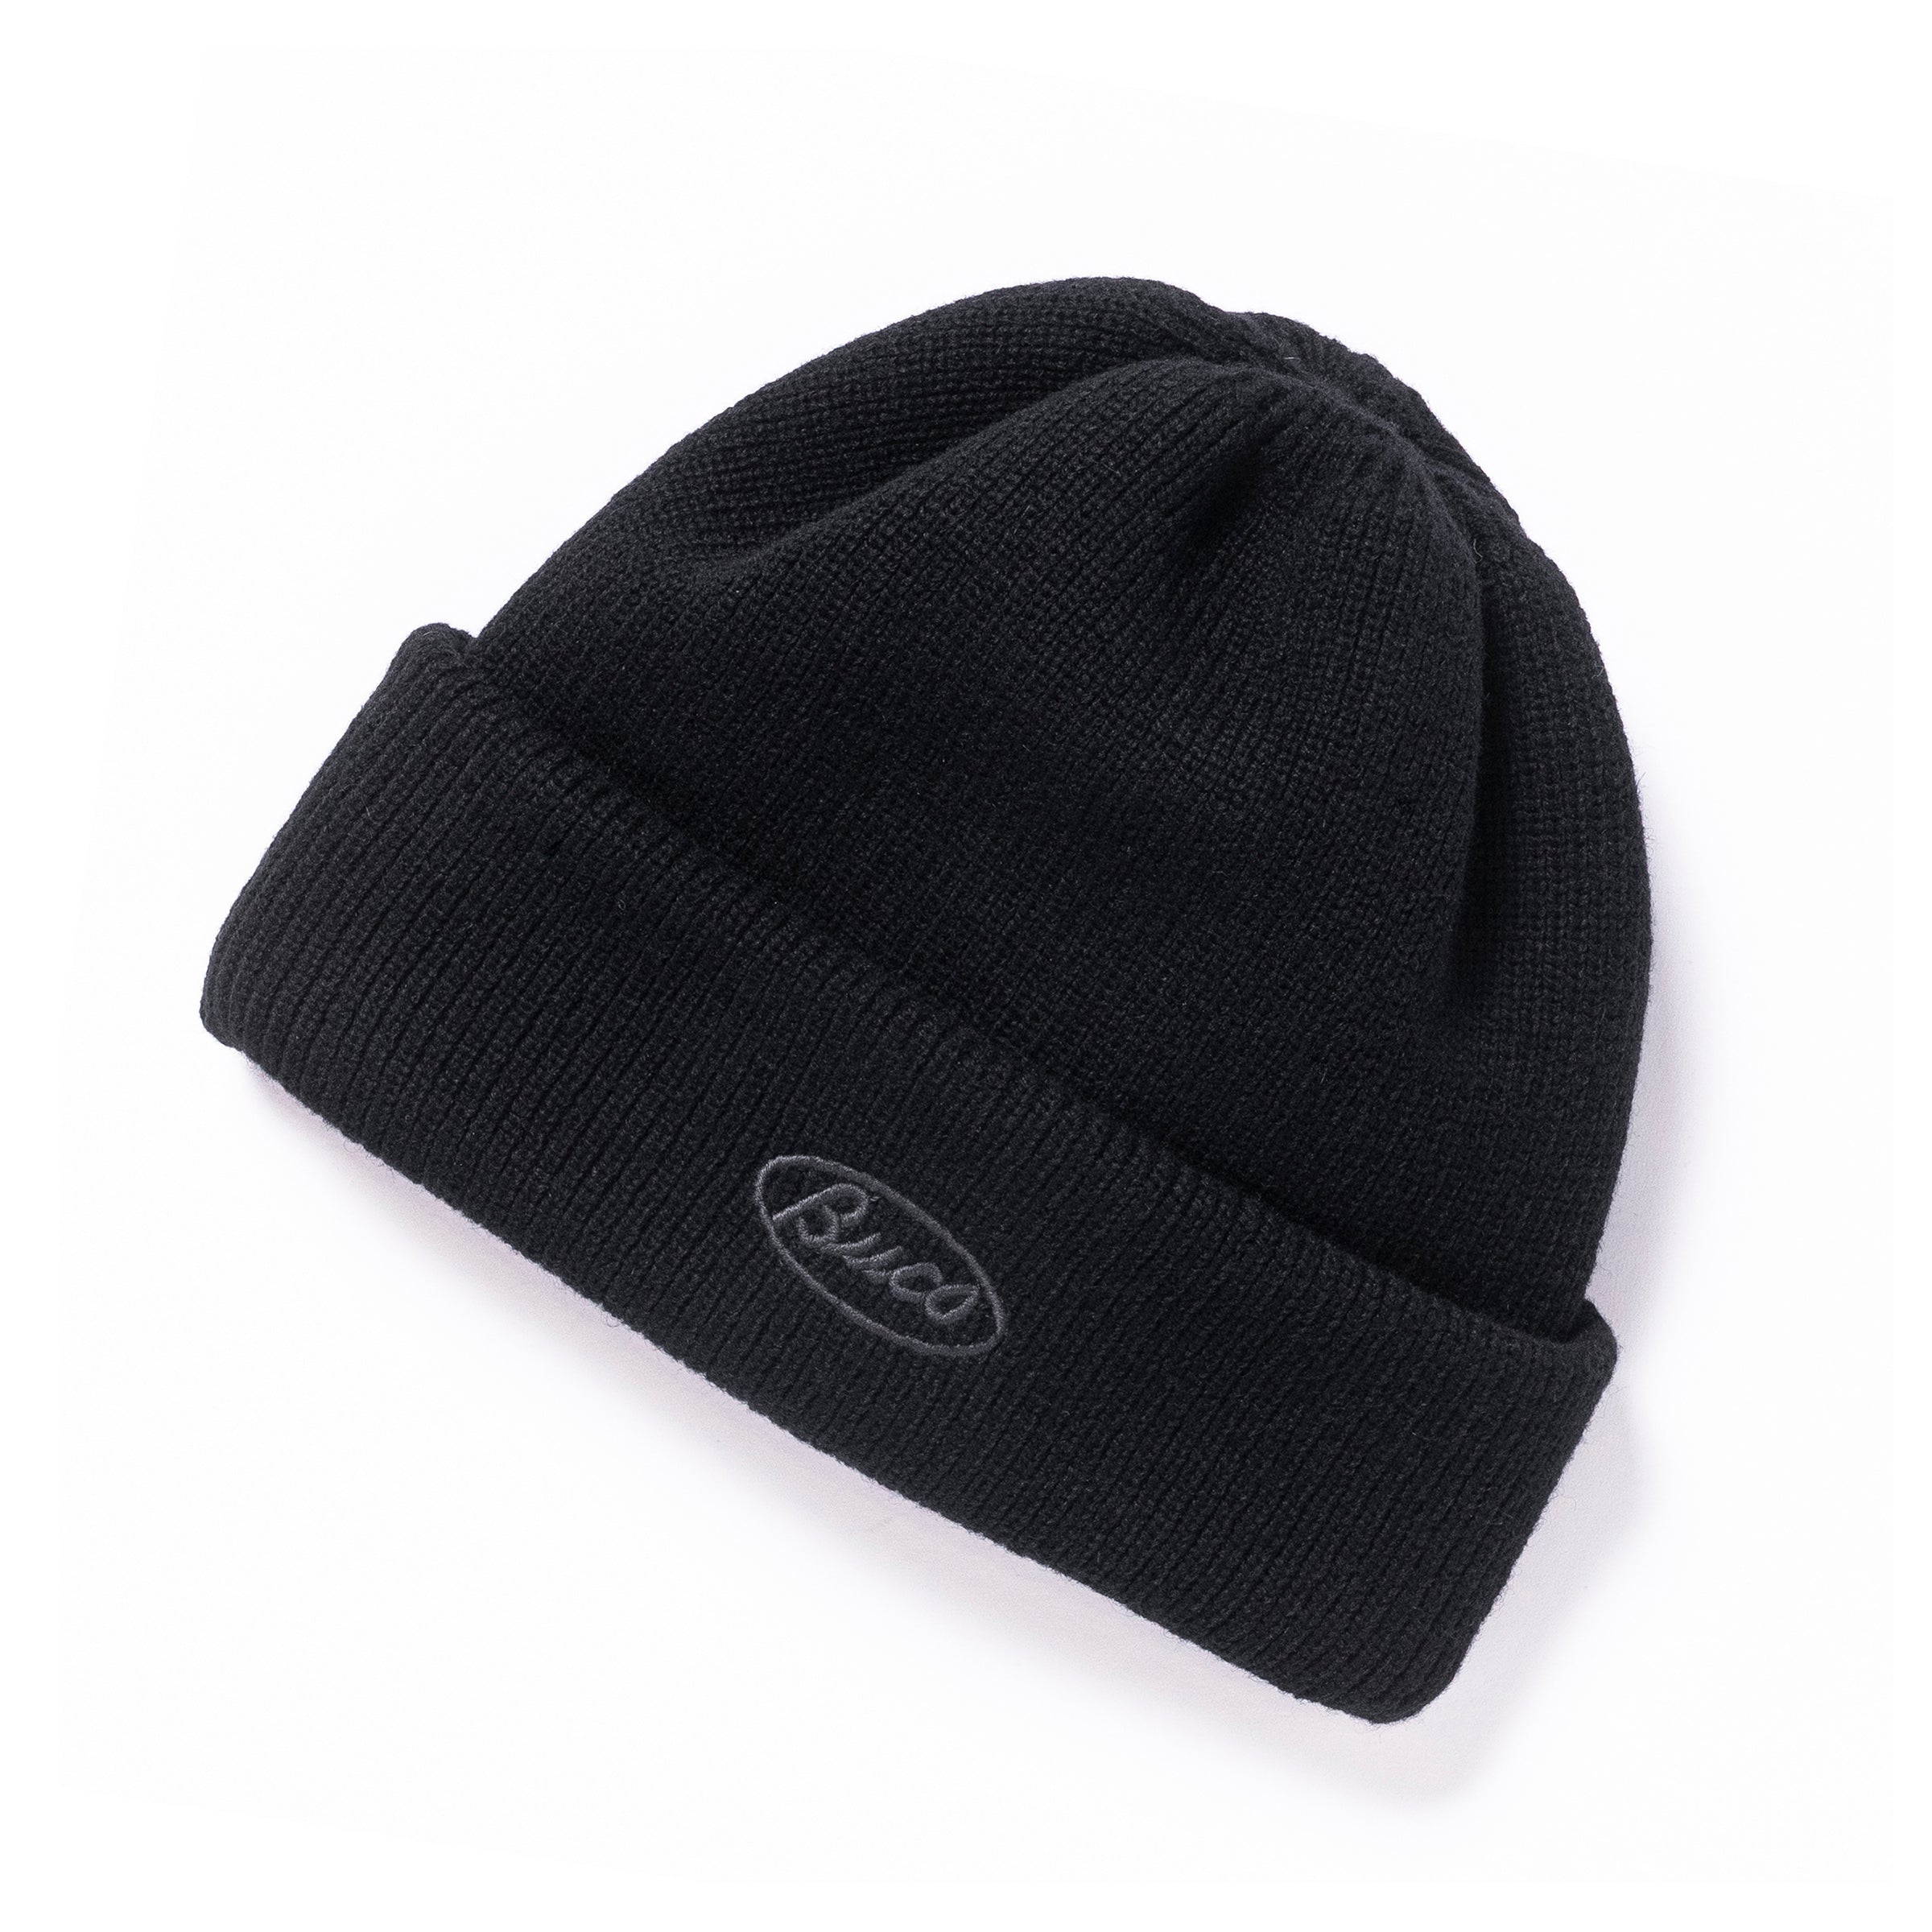 BUCO HEAVY KNIT CAP – The Real McCoy's